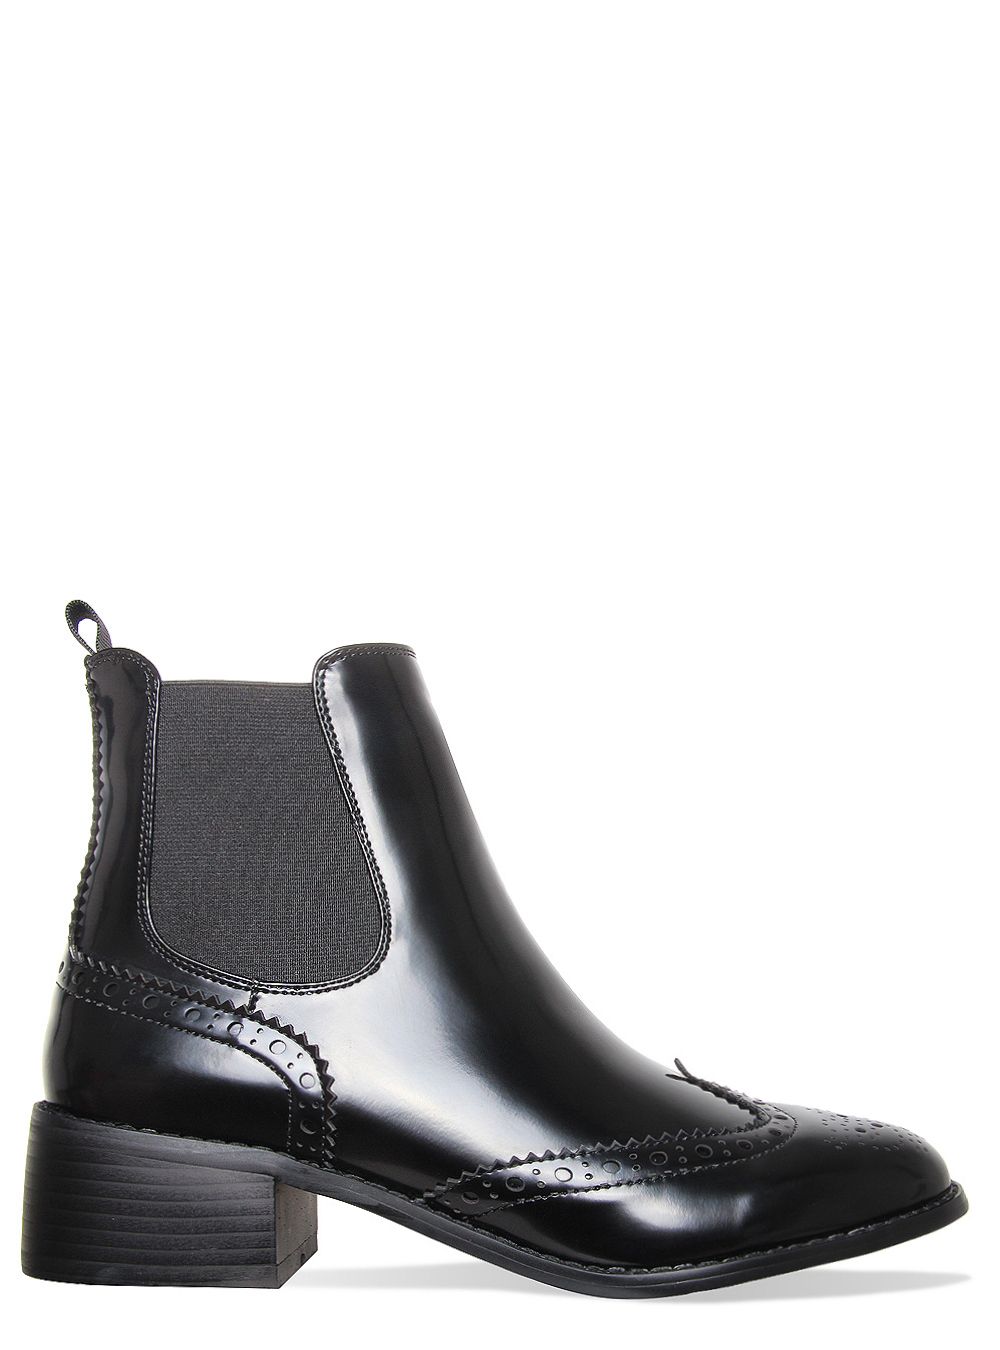 Layla Black Brogue Ankle Chelsea Boots